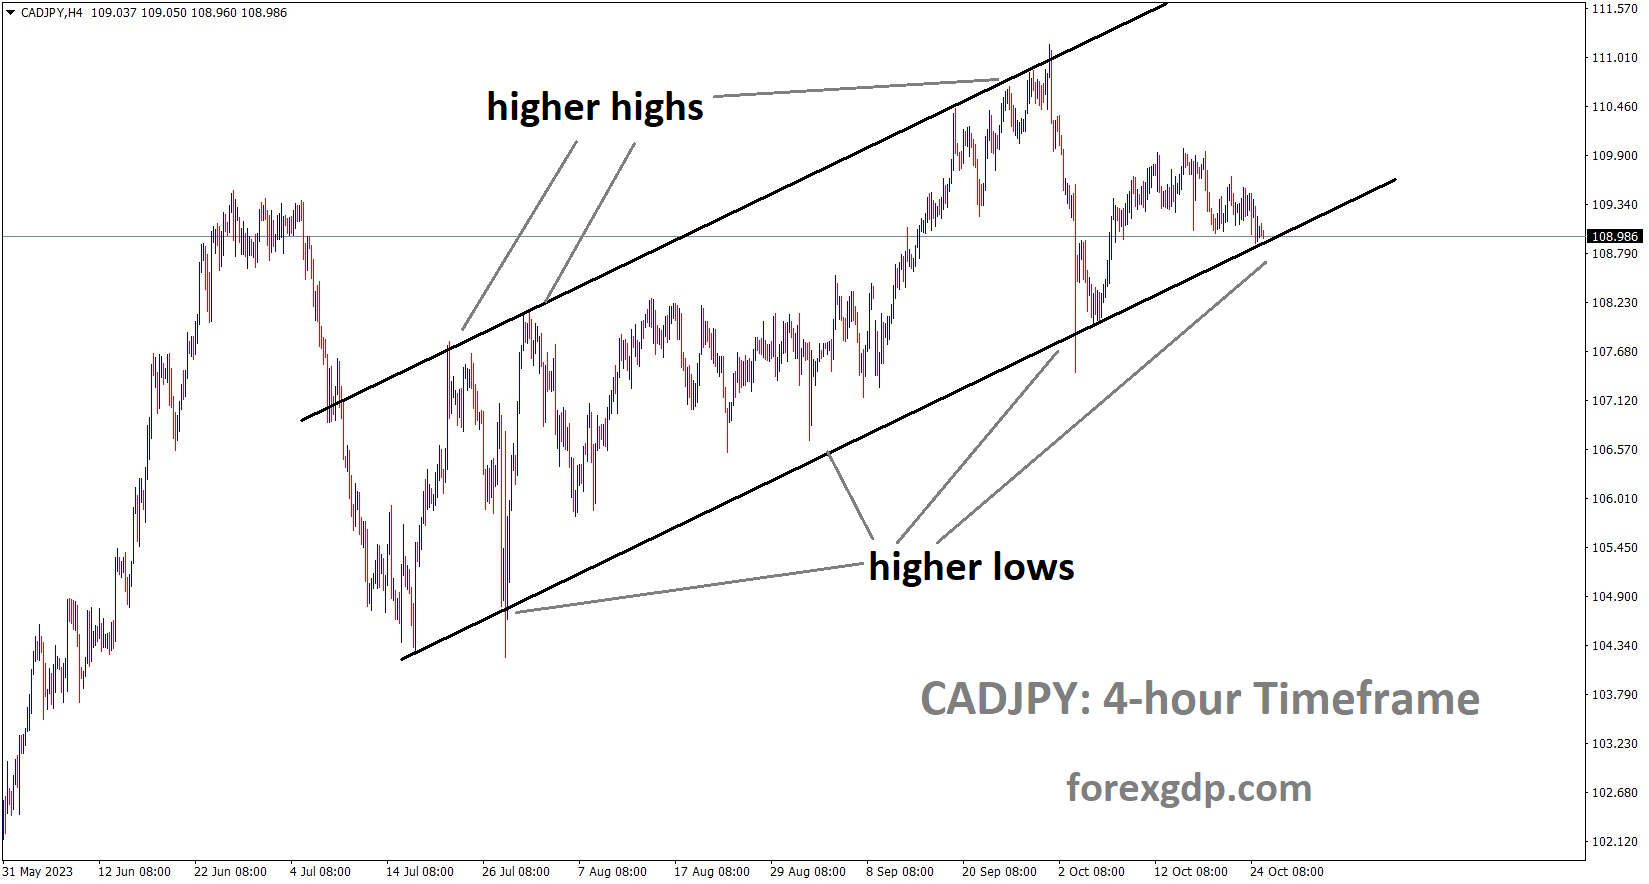 CADJPY is moving in an Ascending channel and the market has reached the higher low area of the channel